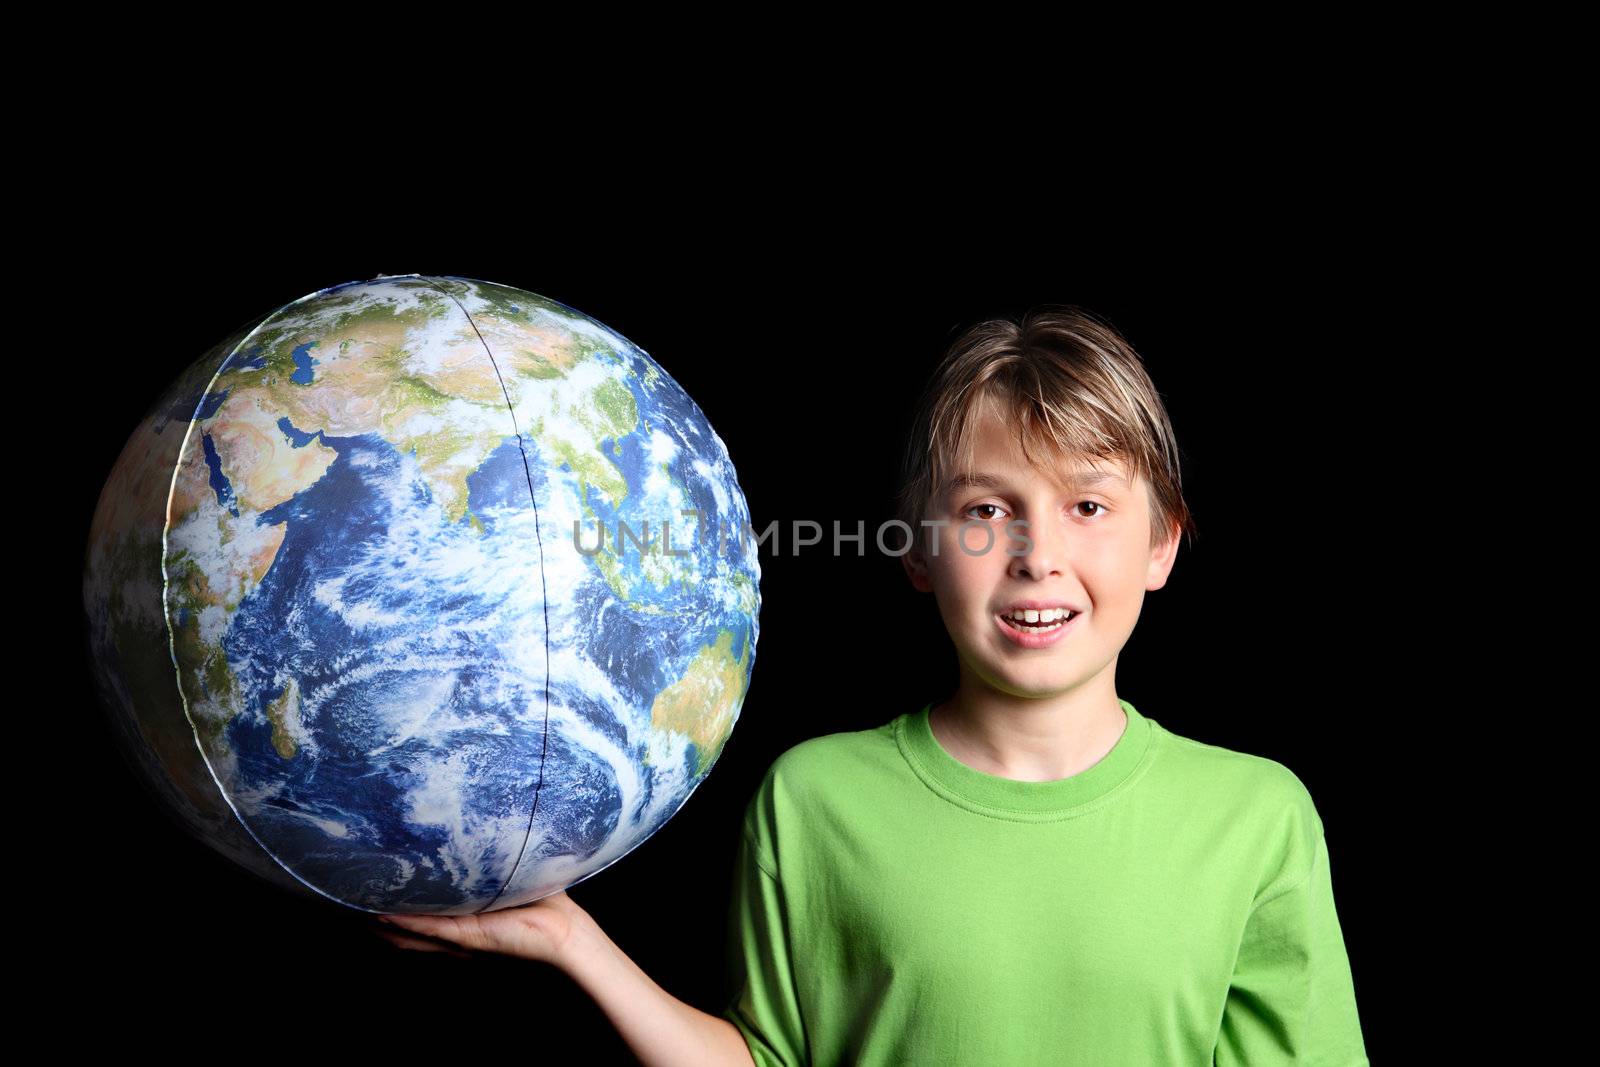 A young boy holding the earth world ball in his hand against a black background.  Images from Nasa.